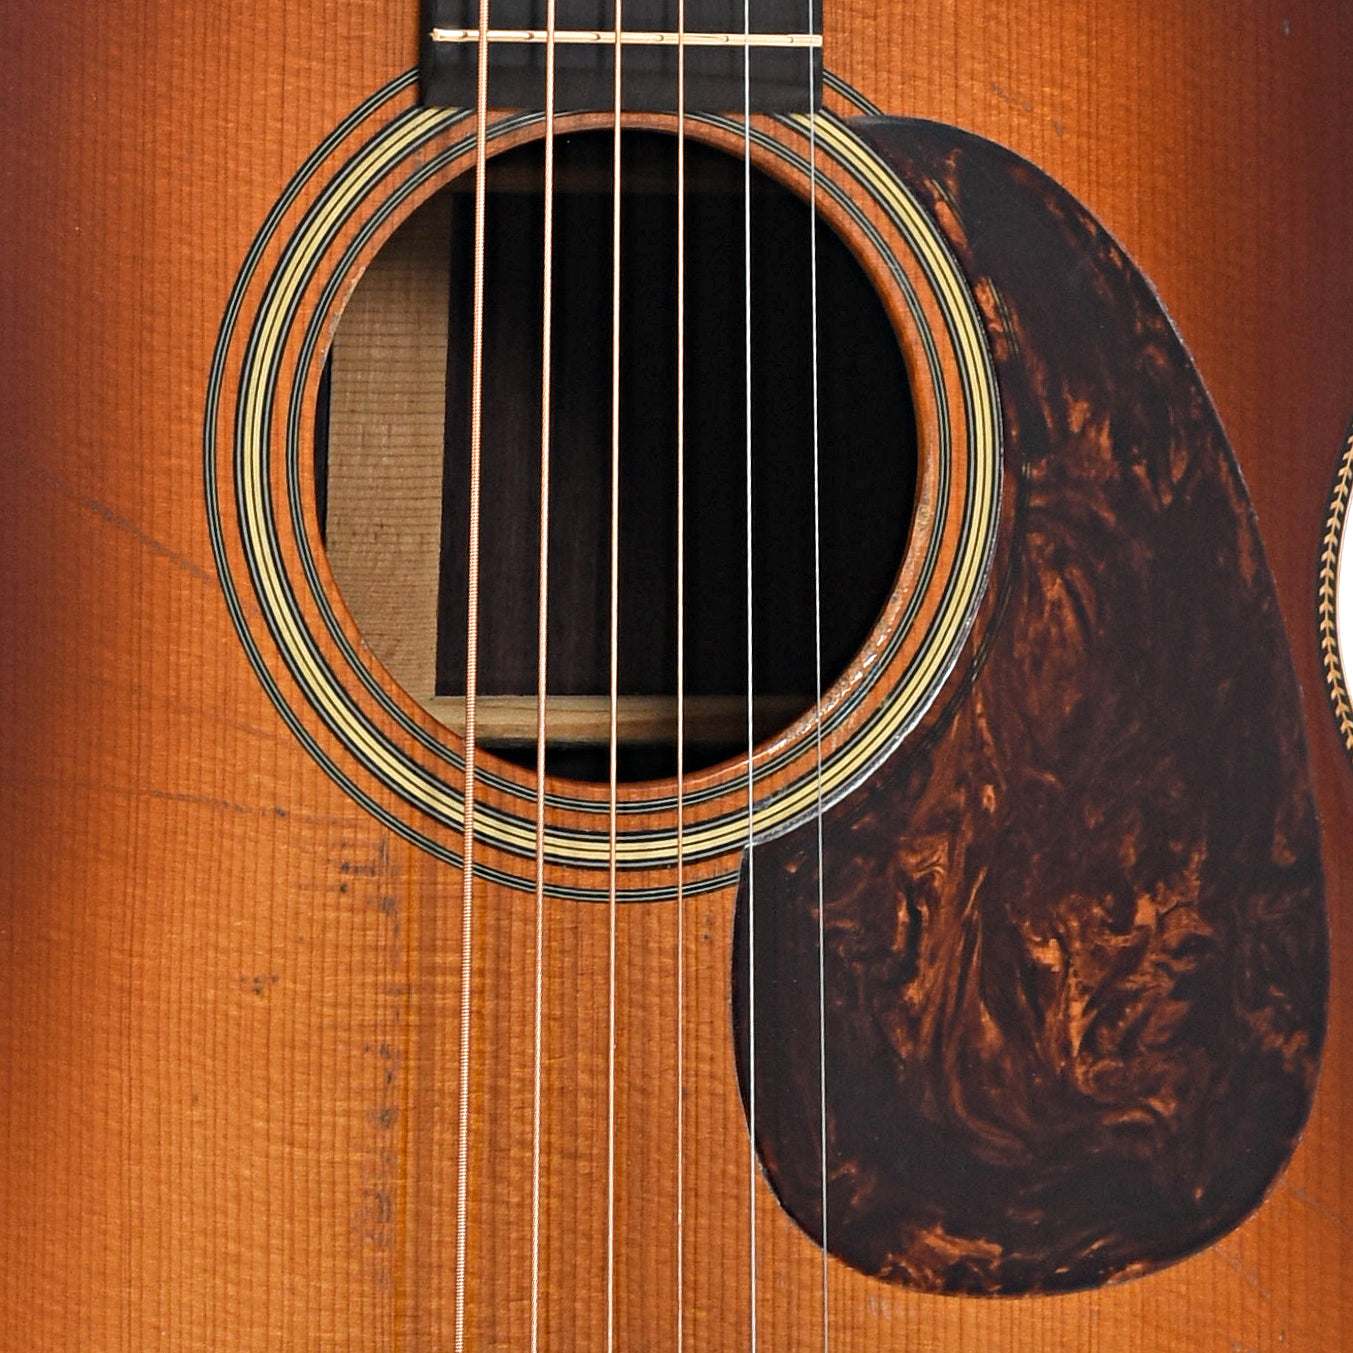 Sound hole of Pre-War Guitar Co. Double Aught (00) Old-Growth Indian Rosewood, Iced-Tea Burst, Level 2 Aging Acoustic